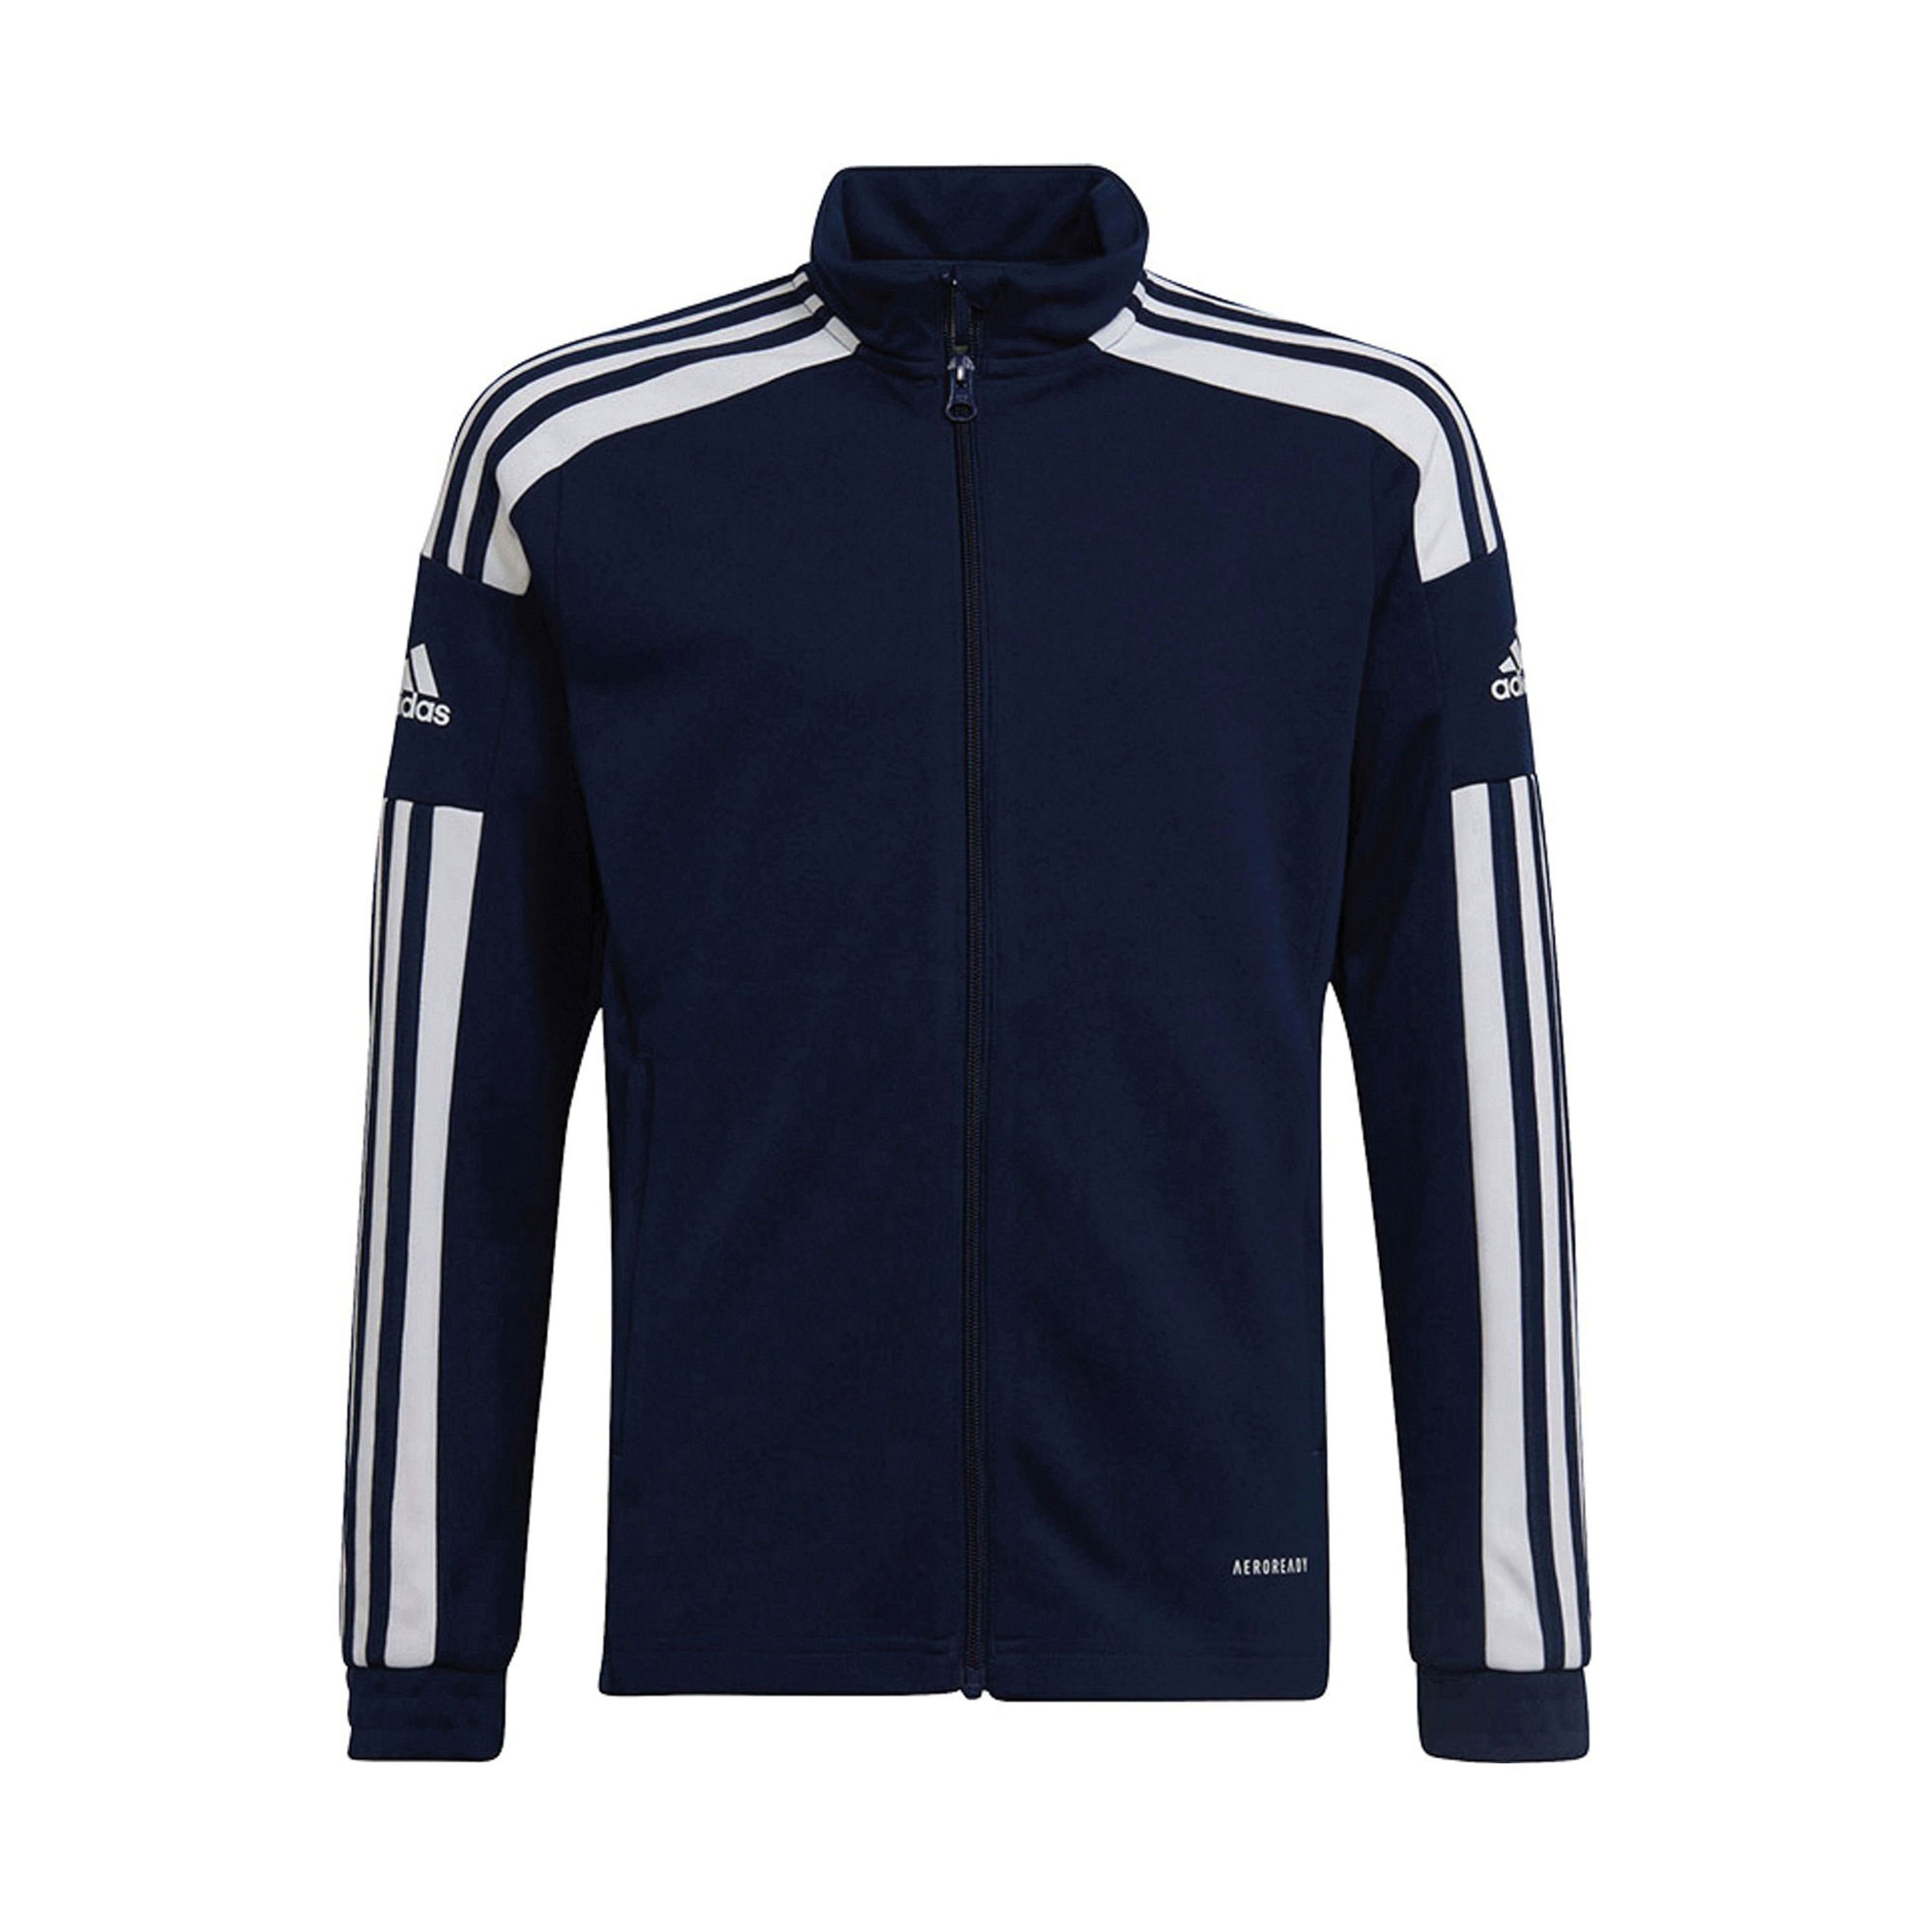 Adidas Perfor ce sportvest donkerblauw wit Gerecycled polyester Opstaande kraag 164